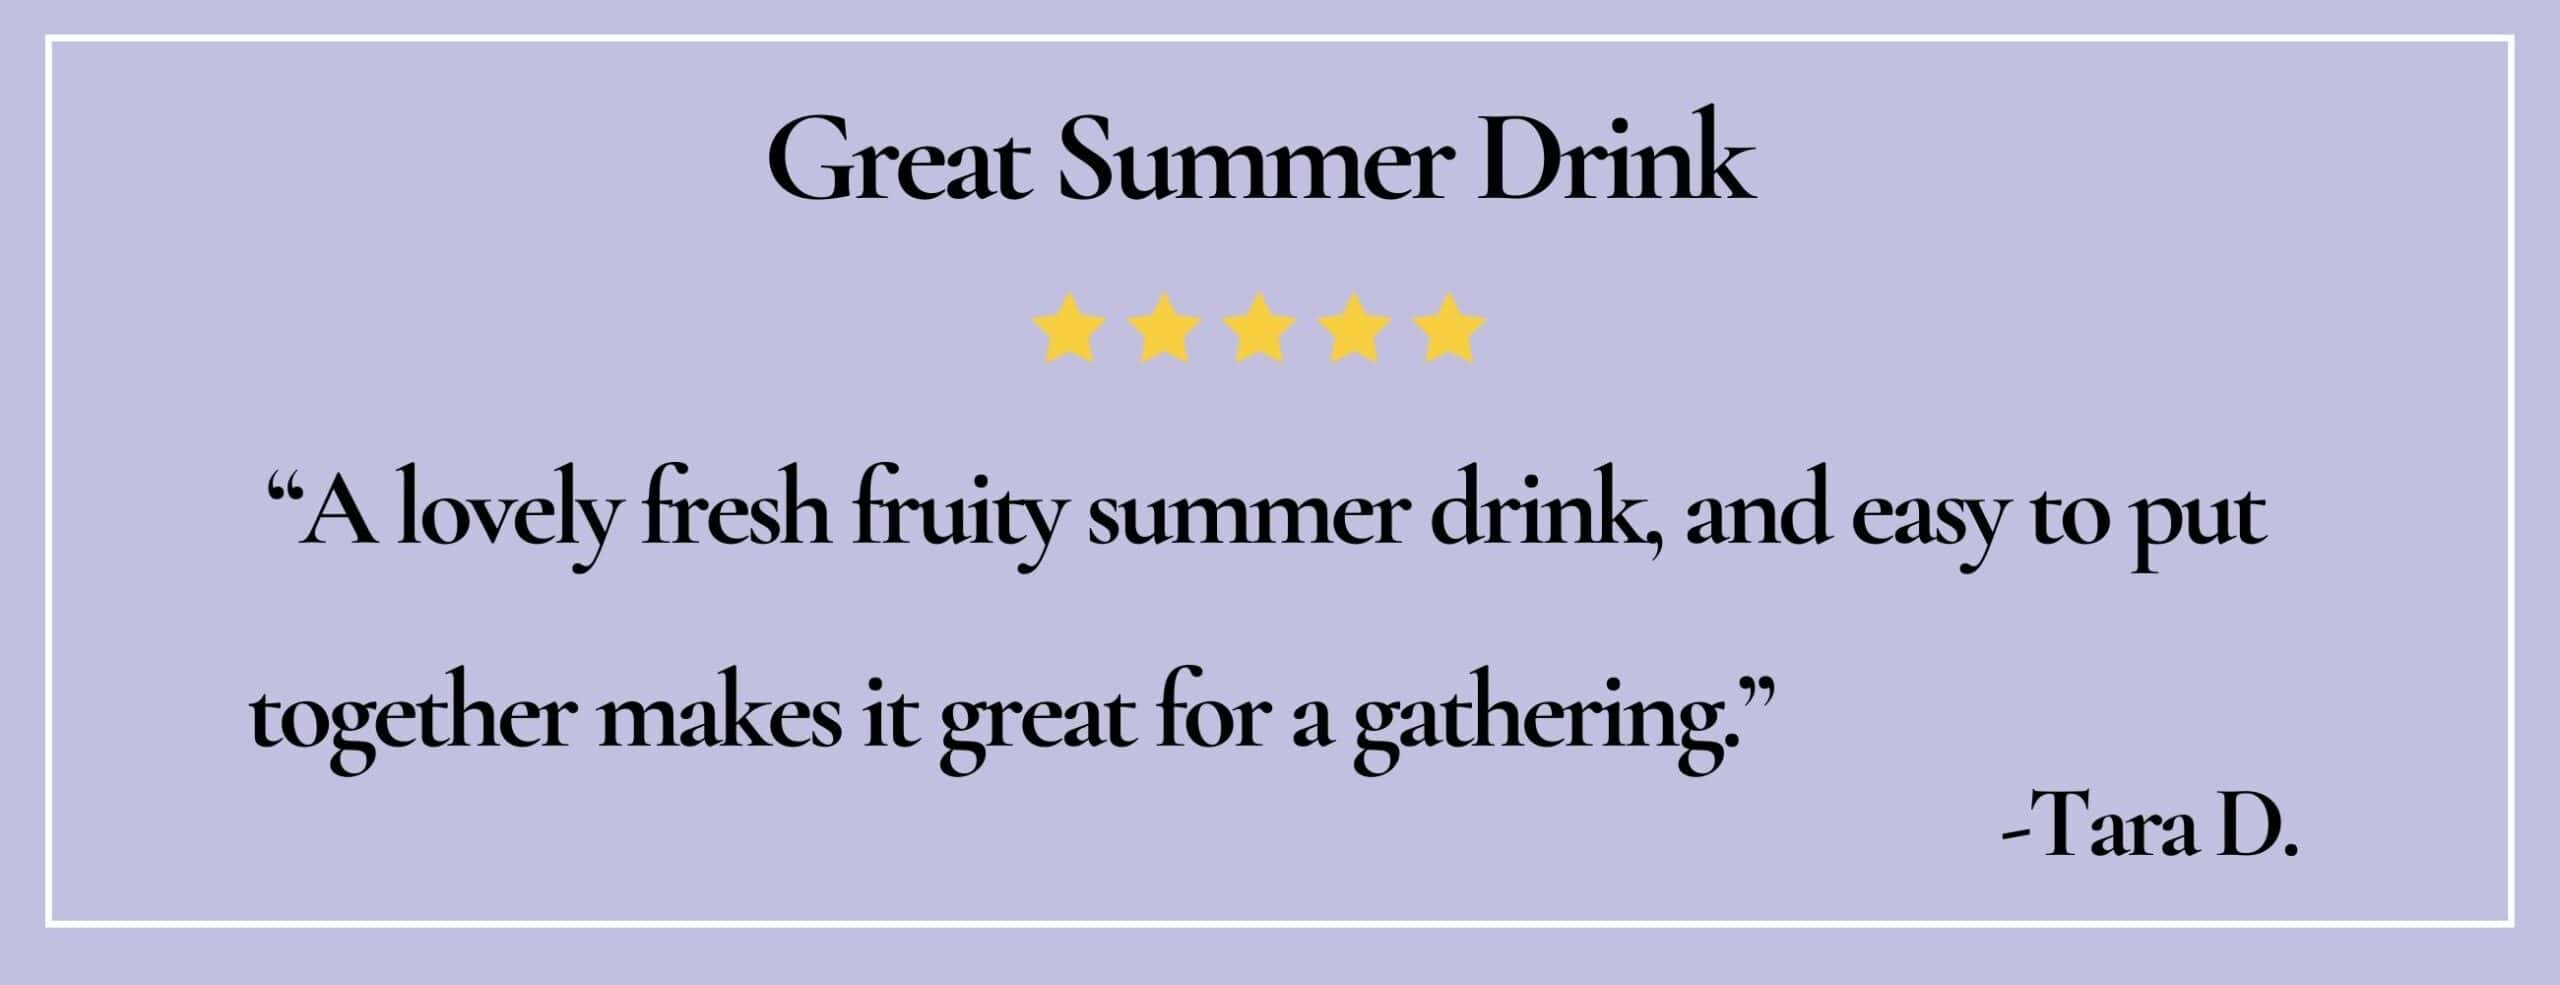 text box with quote: "A lovely fresh fruity summer drink, and easy to put together makes it great for a gathering." - Tara D.